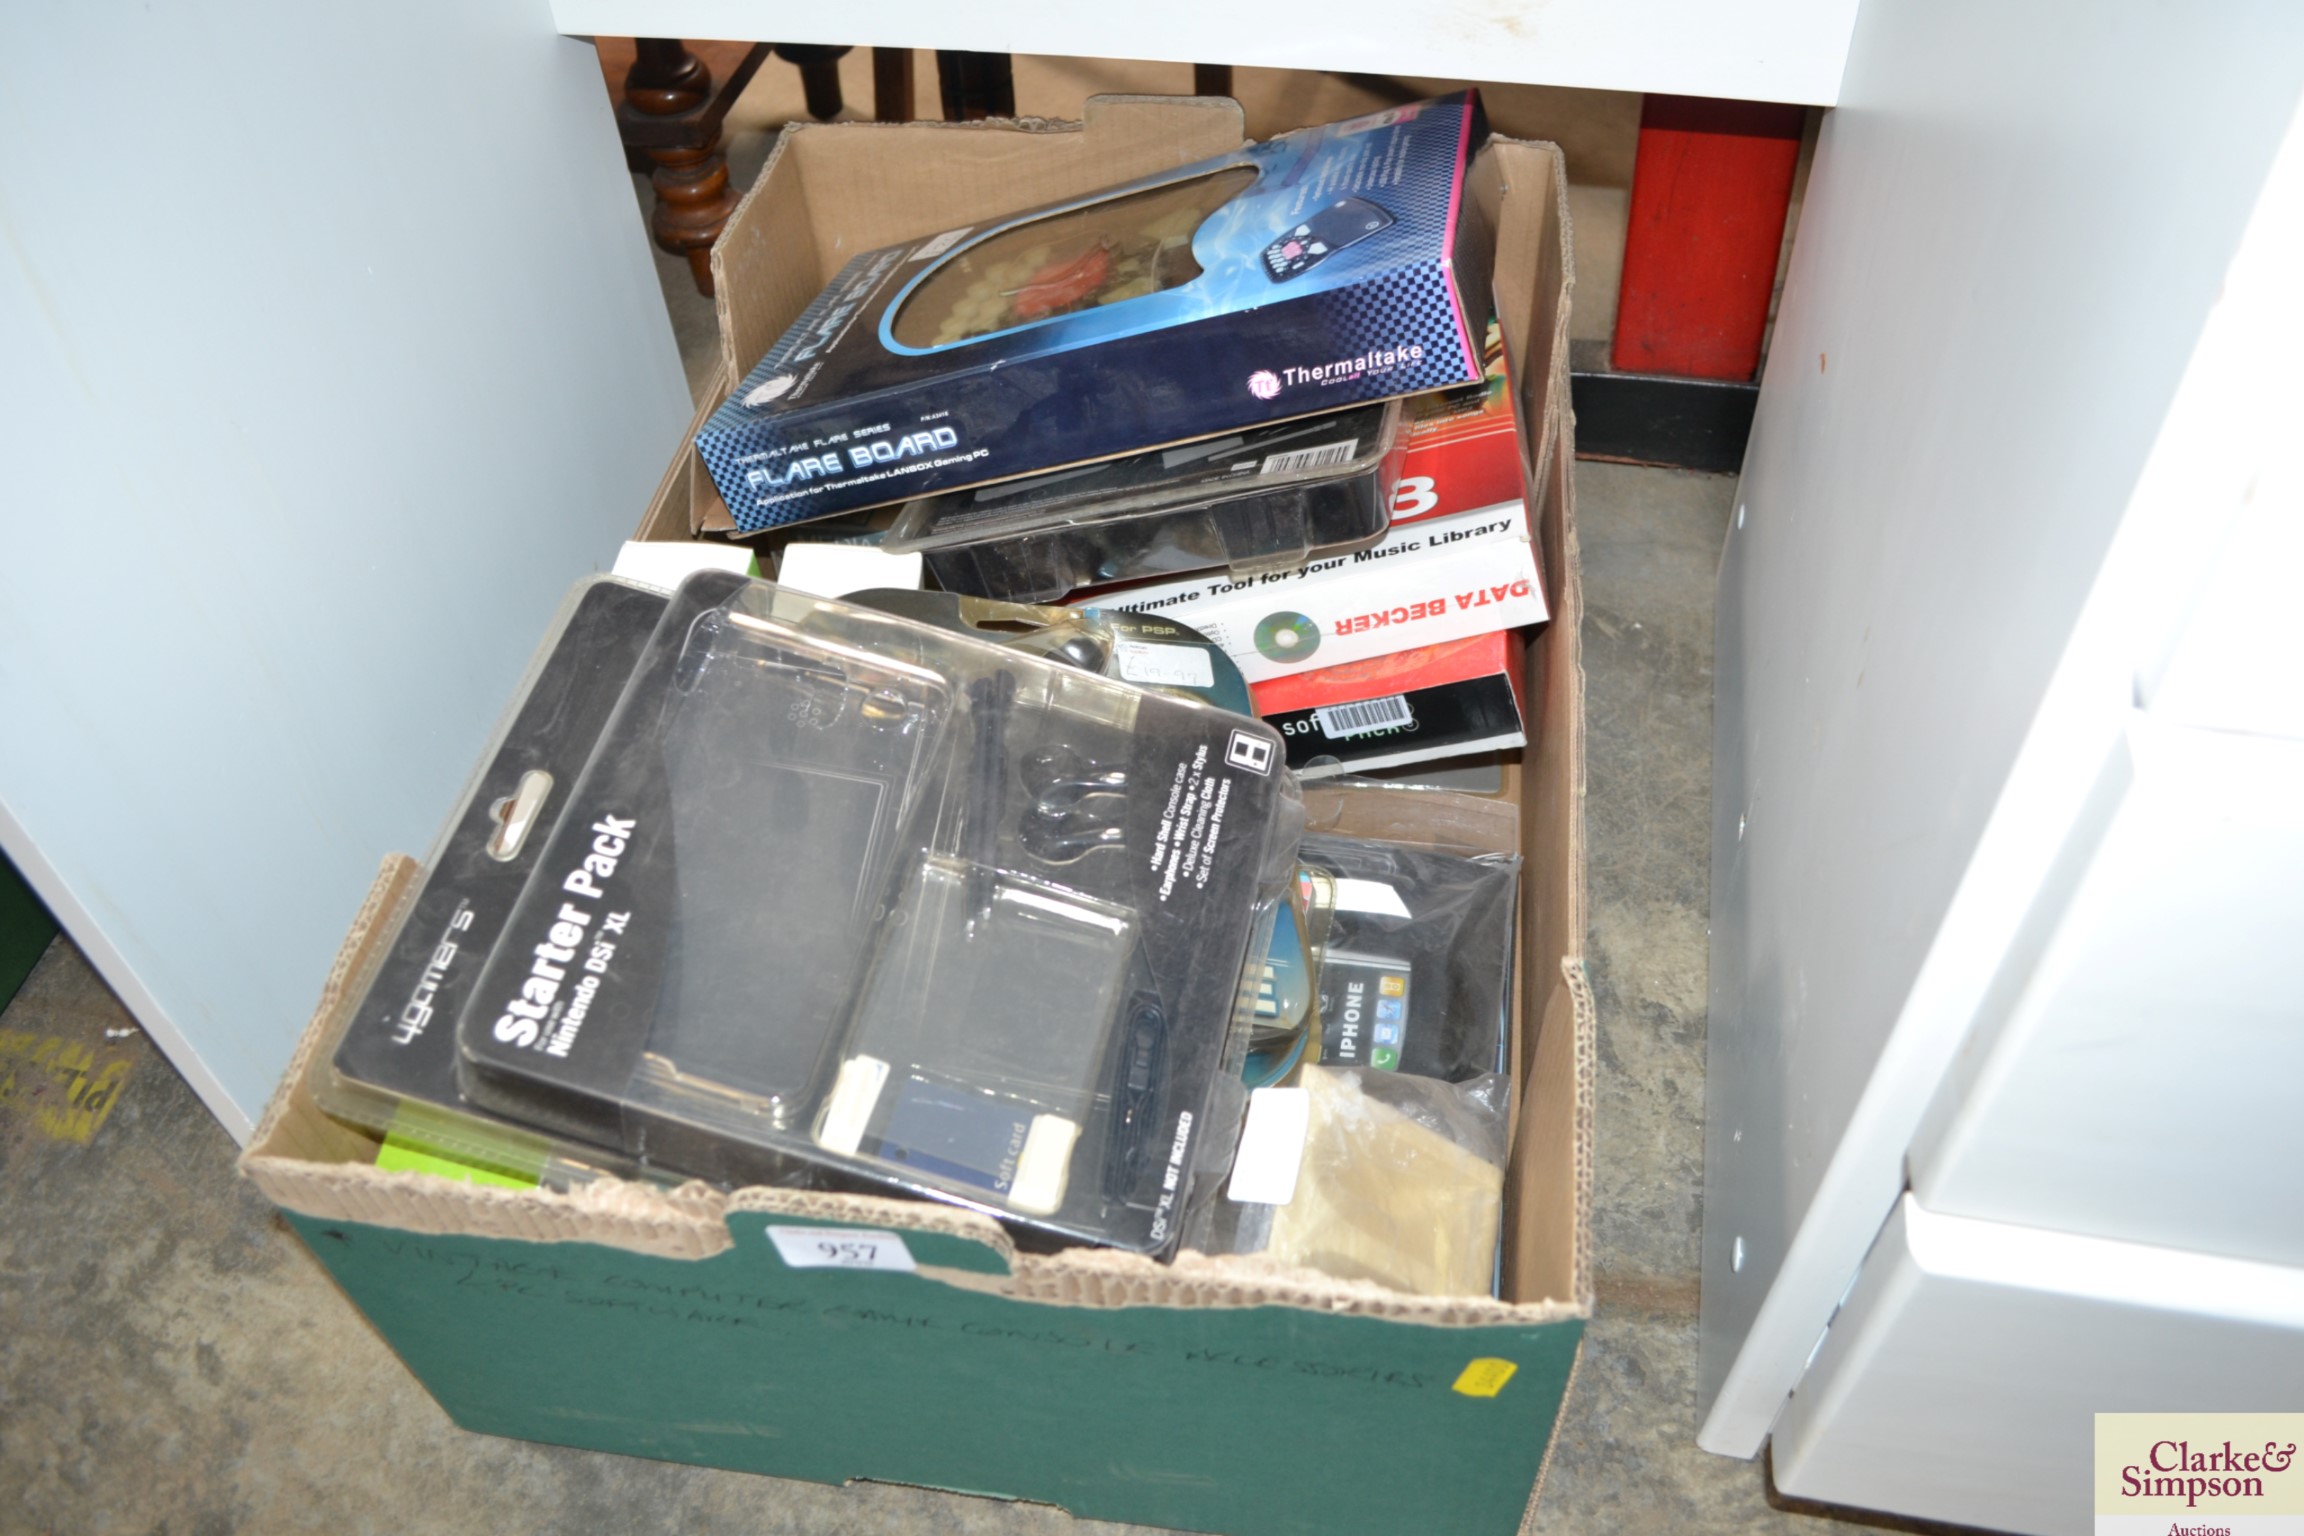 A box containing various computer and games consol